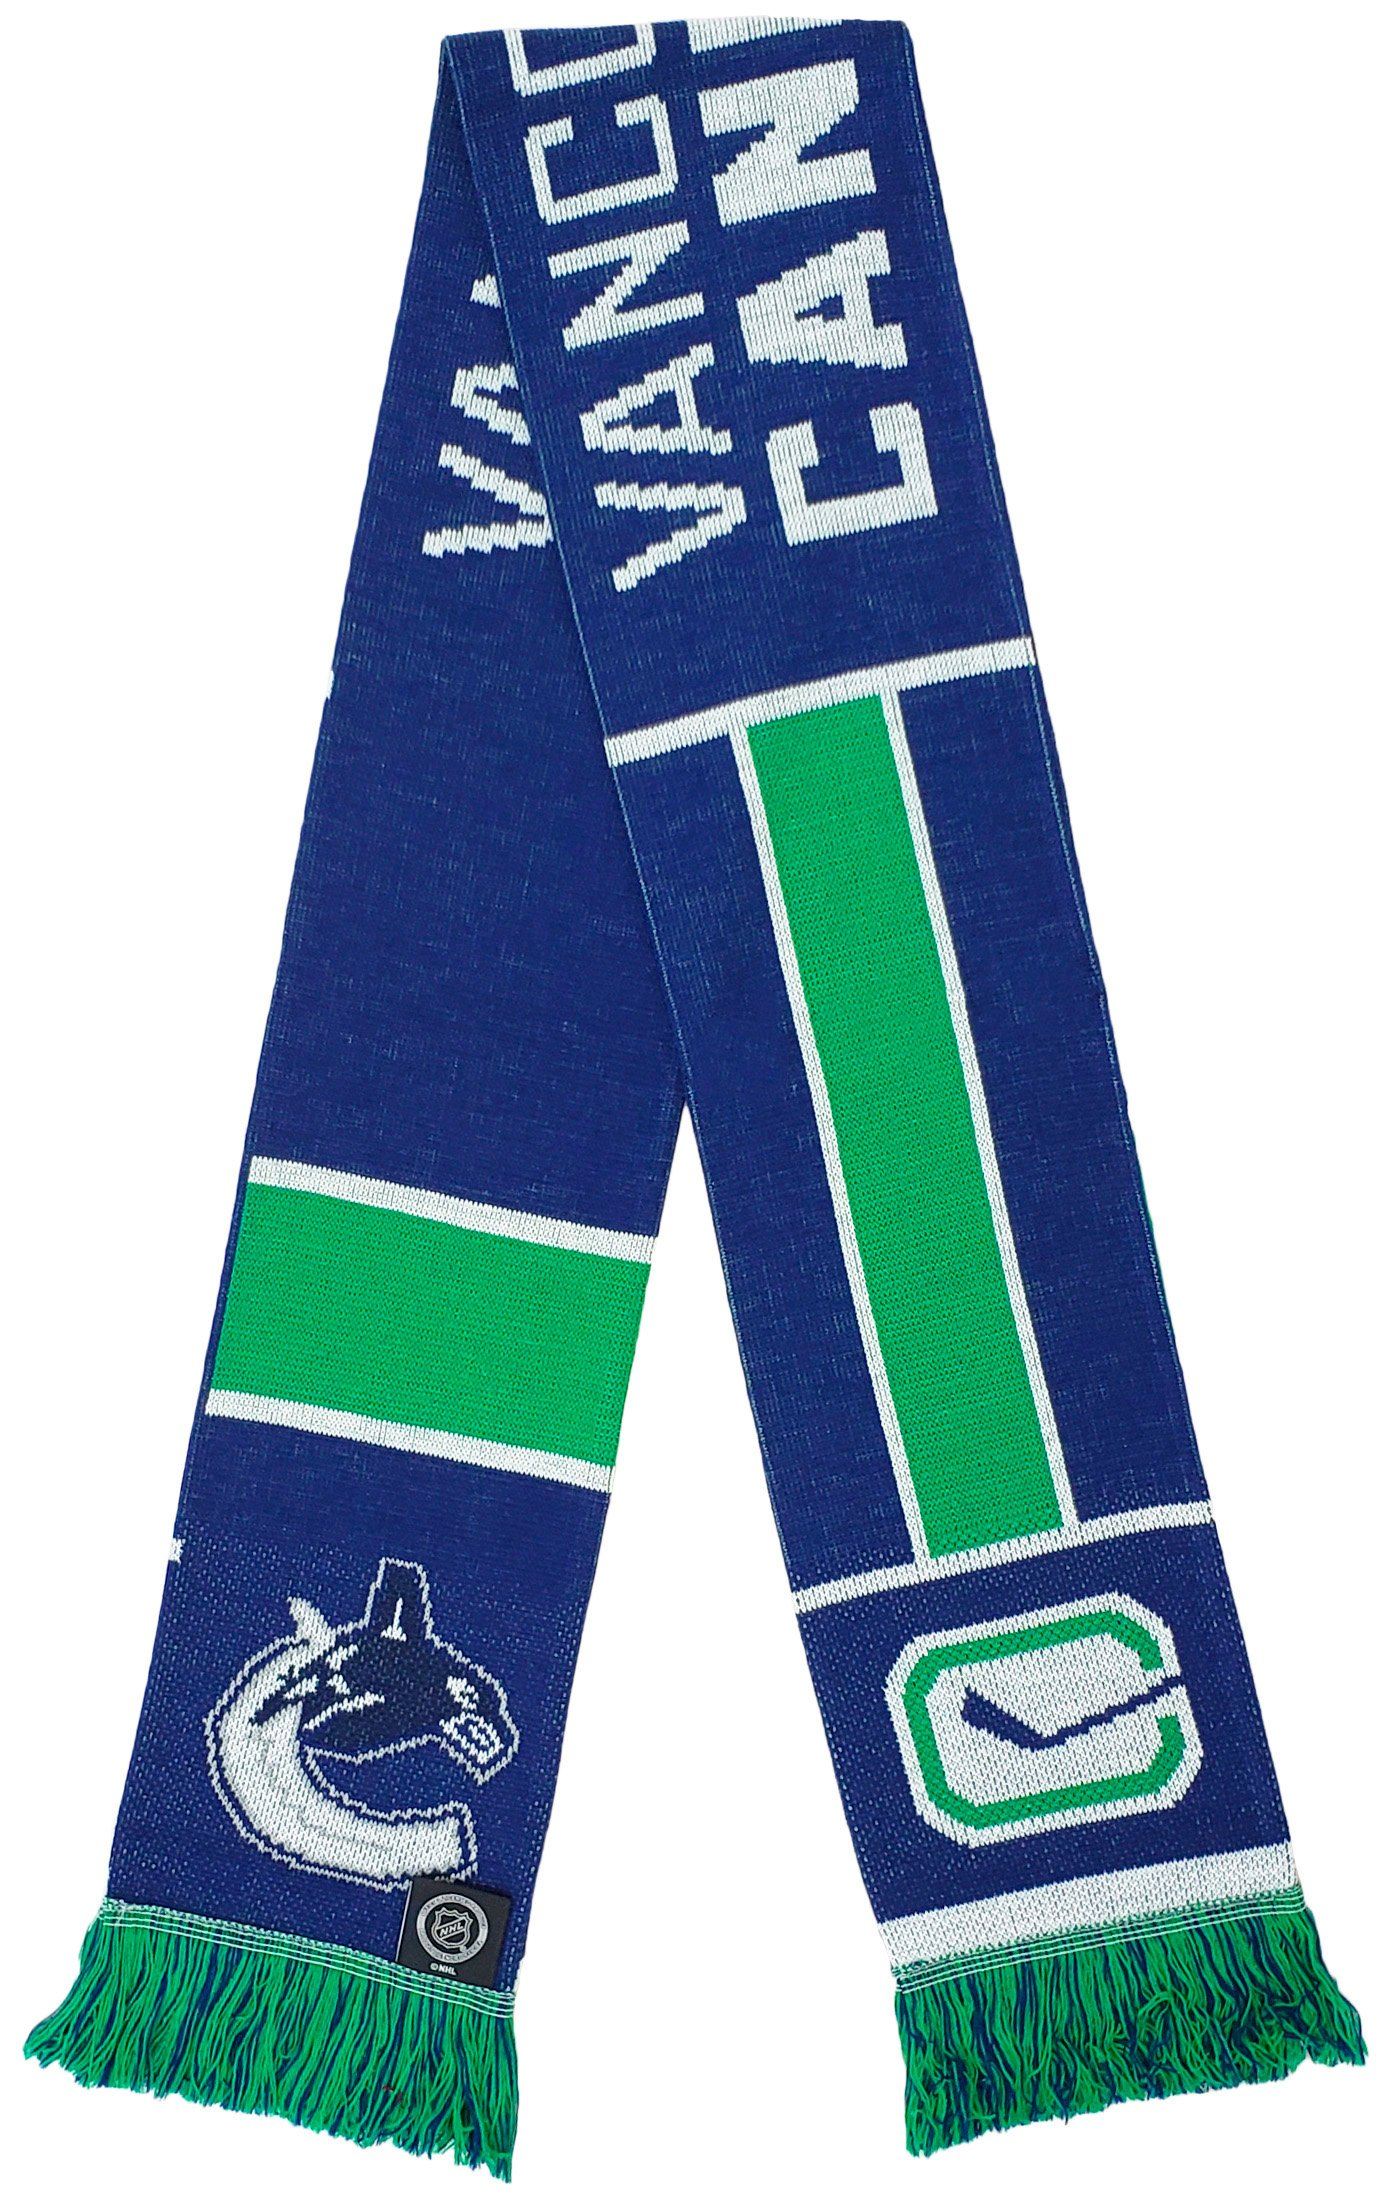 Vancouver Canucks NHL Official Licensed Merchandise